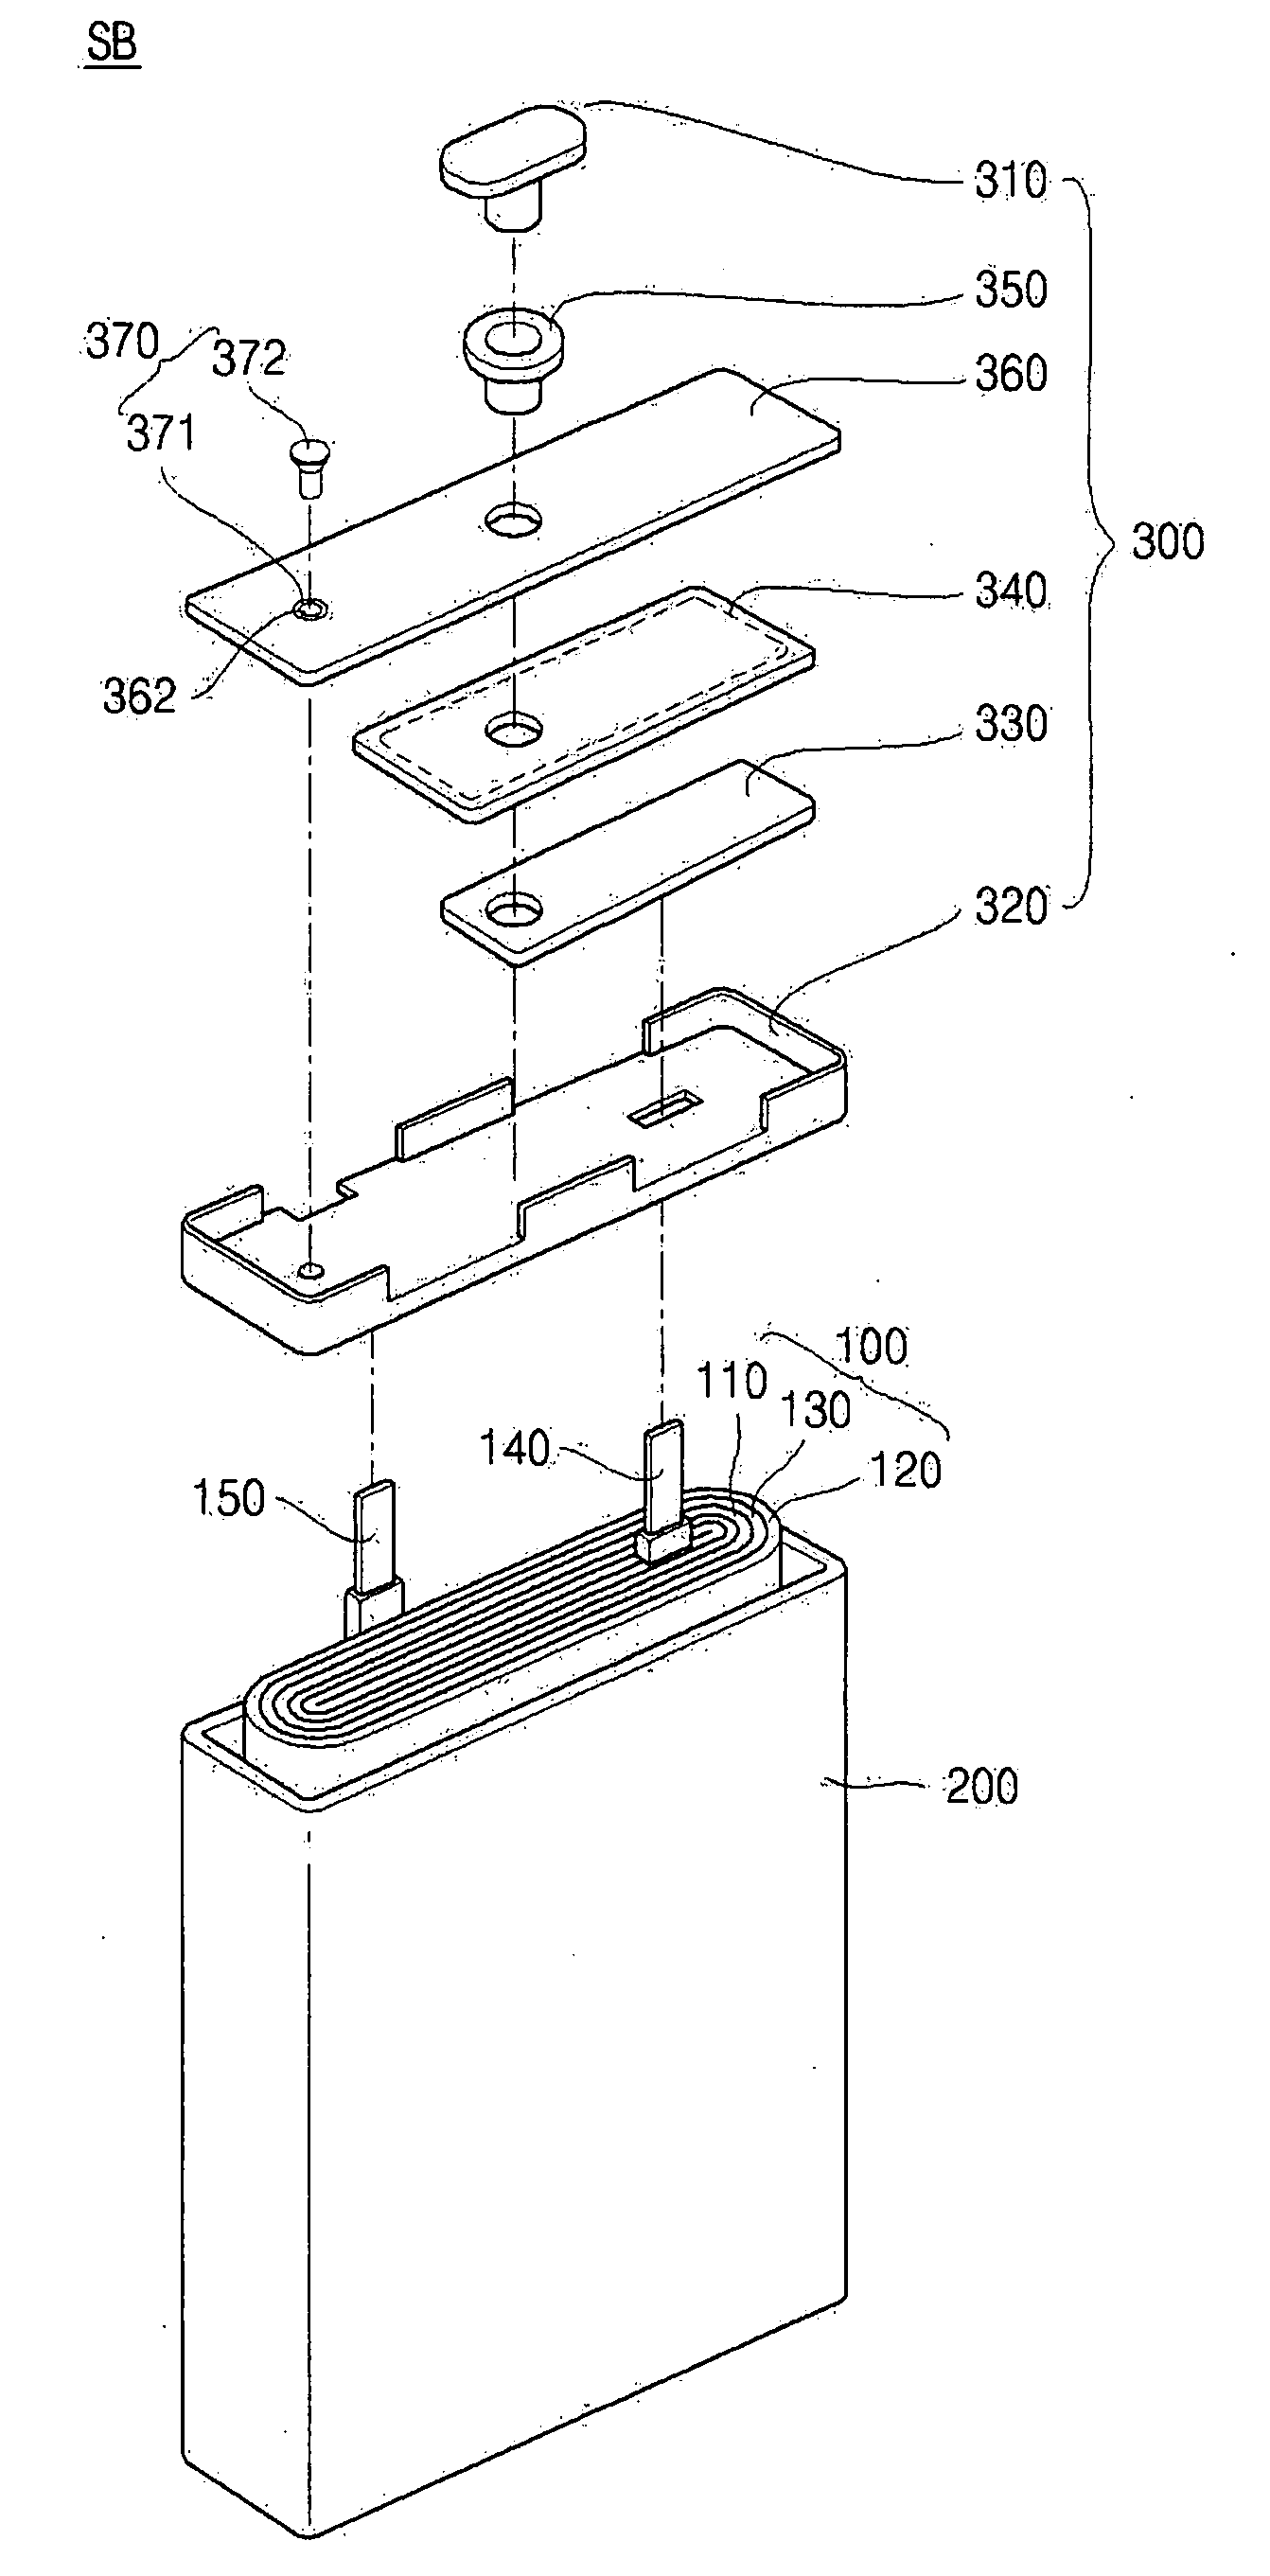 Secondary battery and its method of manufacture